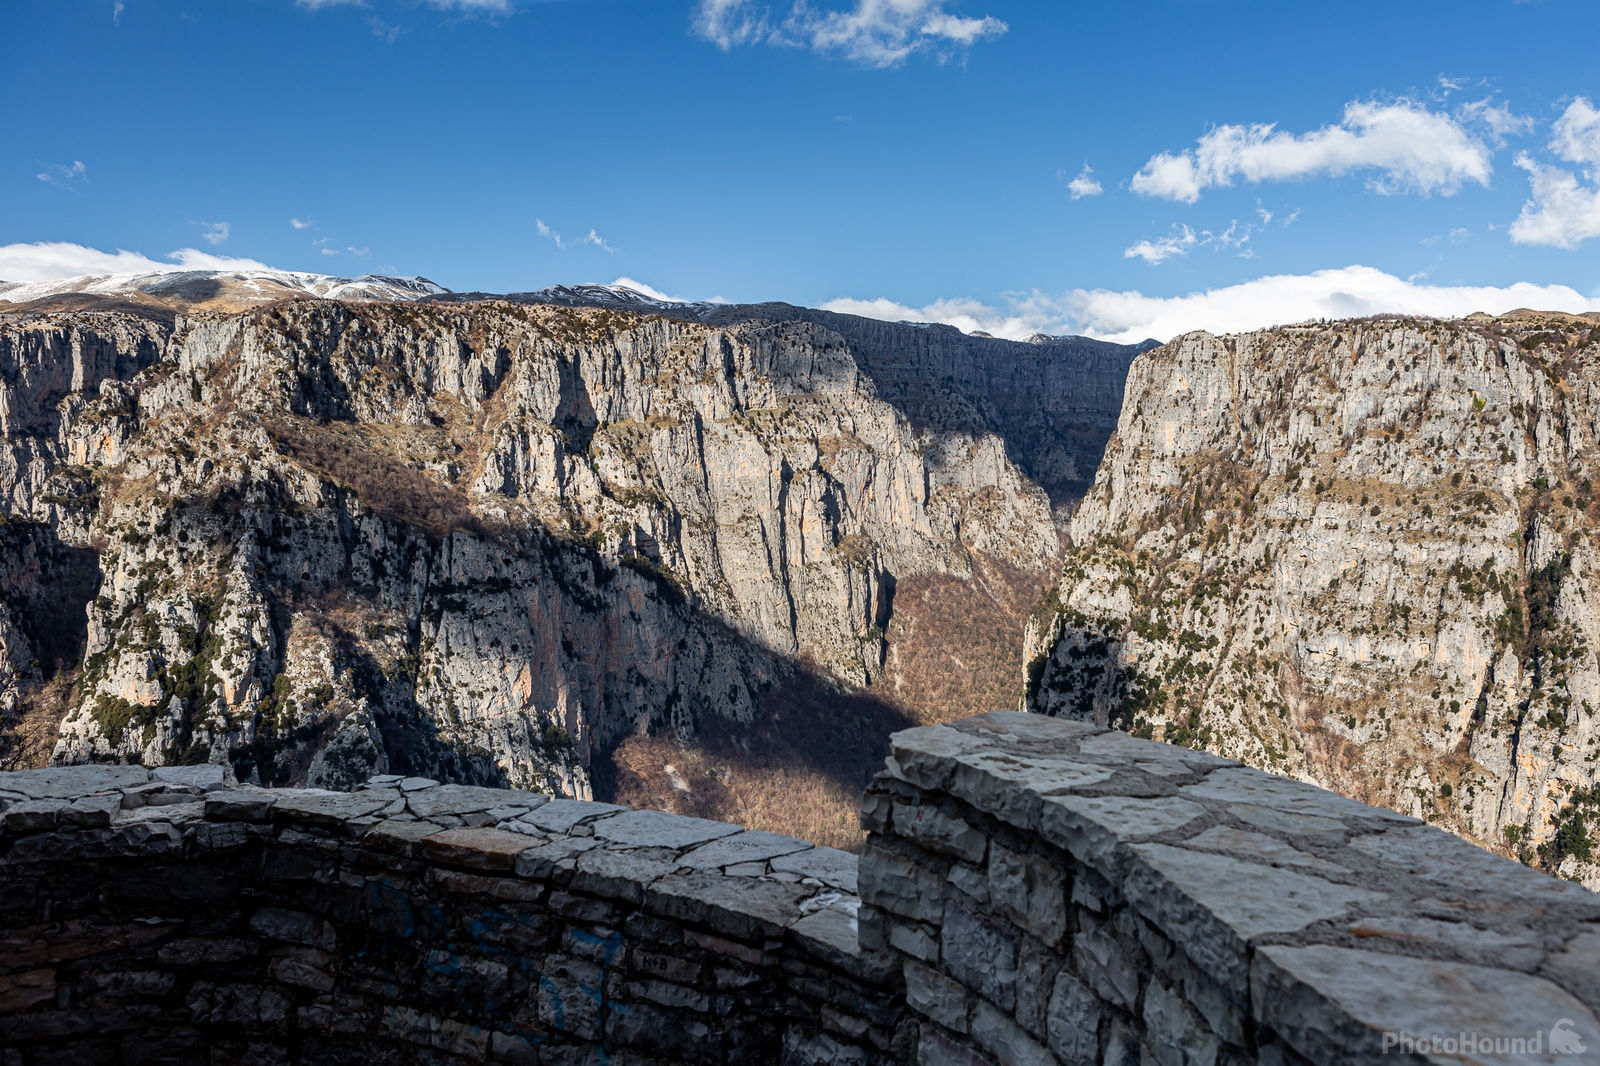 Image of Vikos gorge - Oxya viewpoint by Dancho Hristov